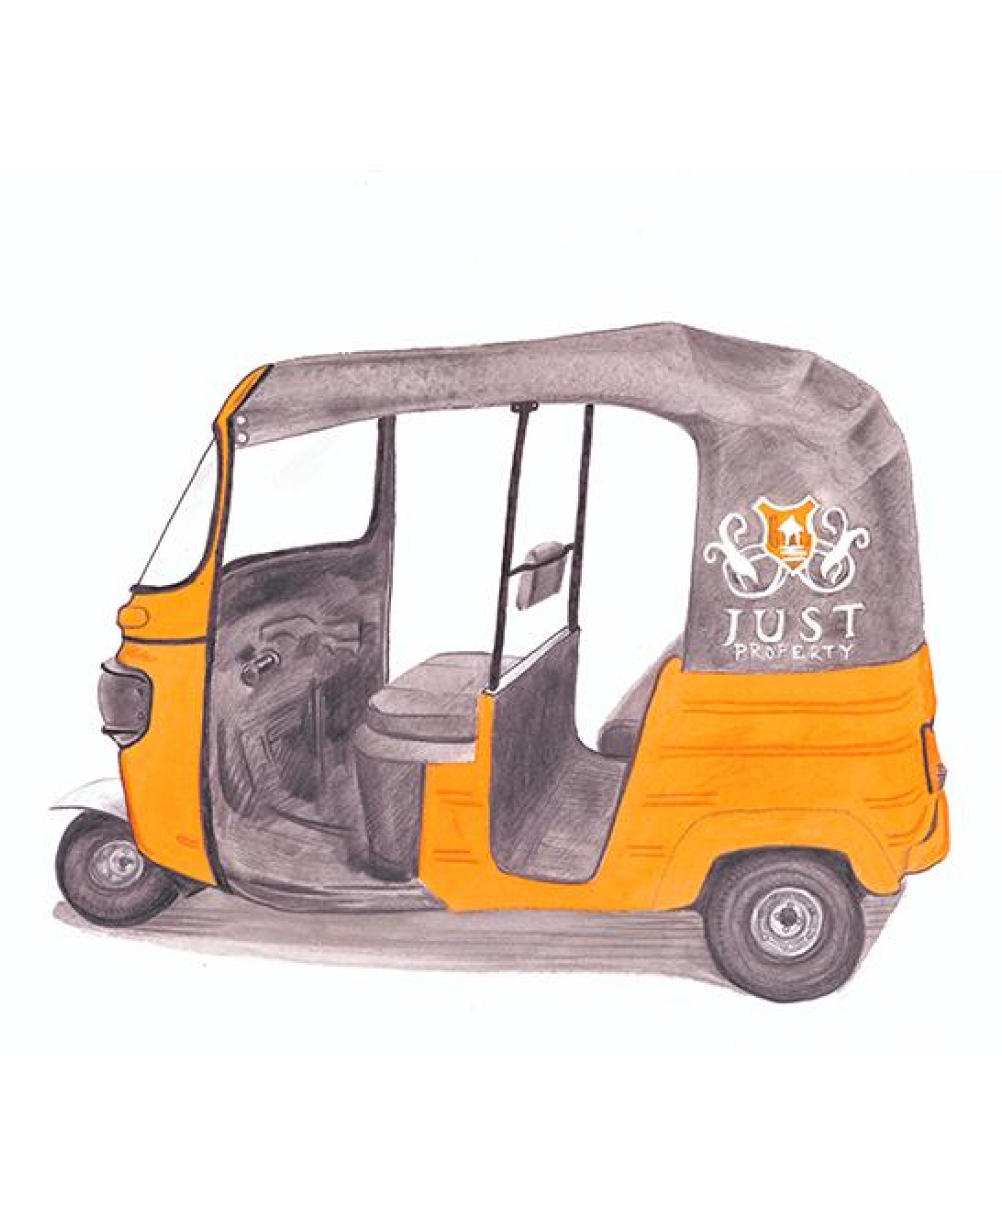 Read more about the article Terry the Tuk Tuk